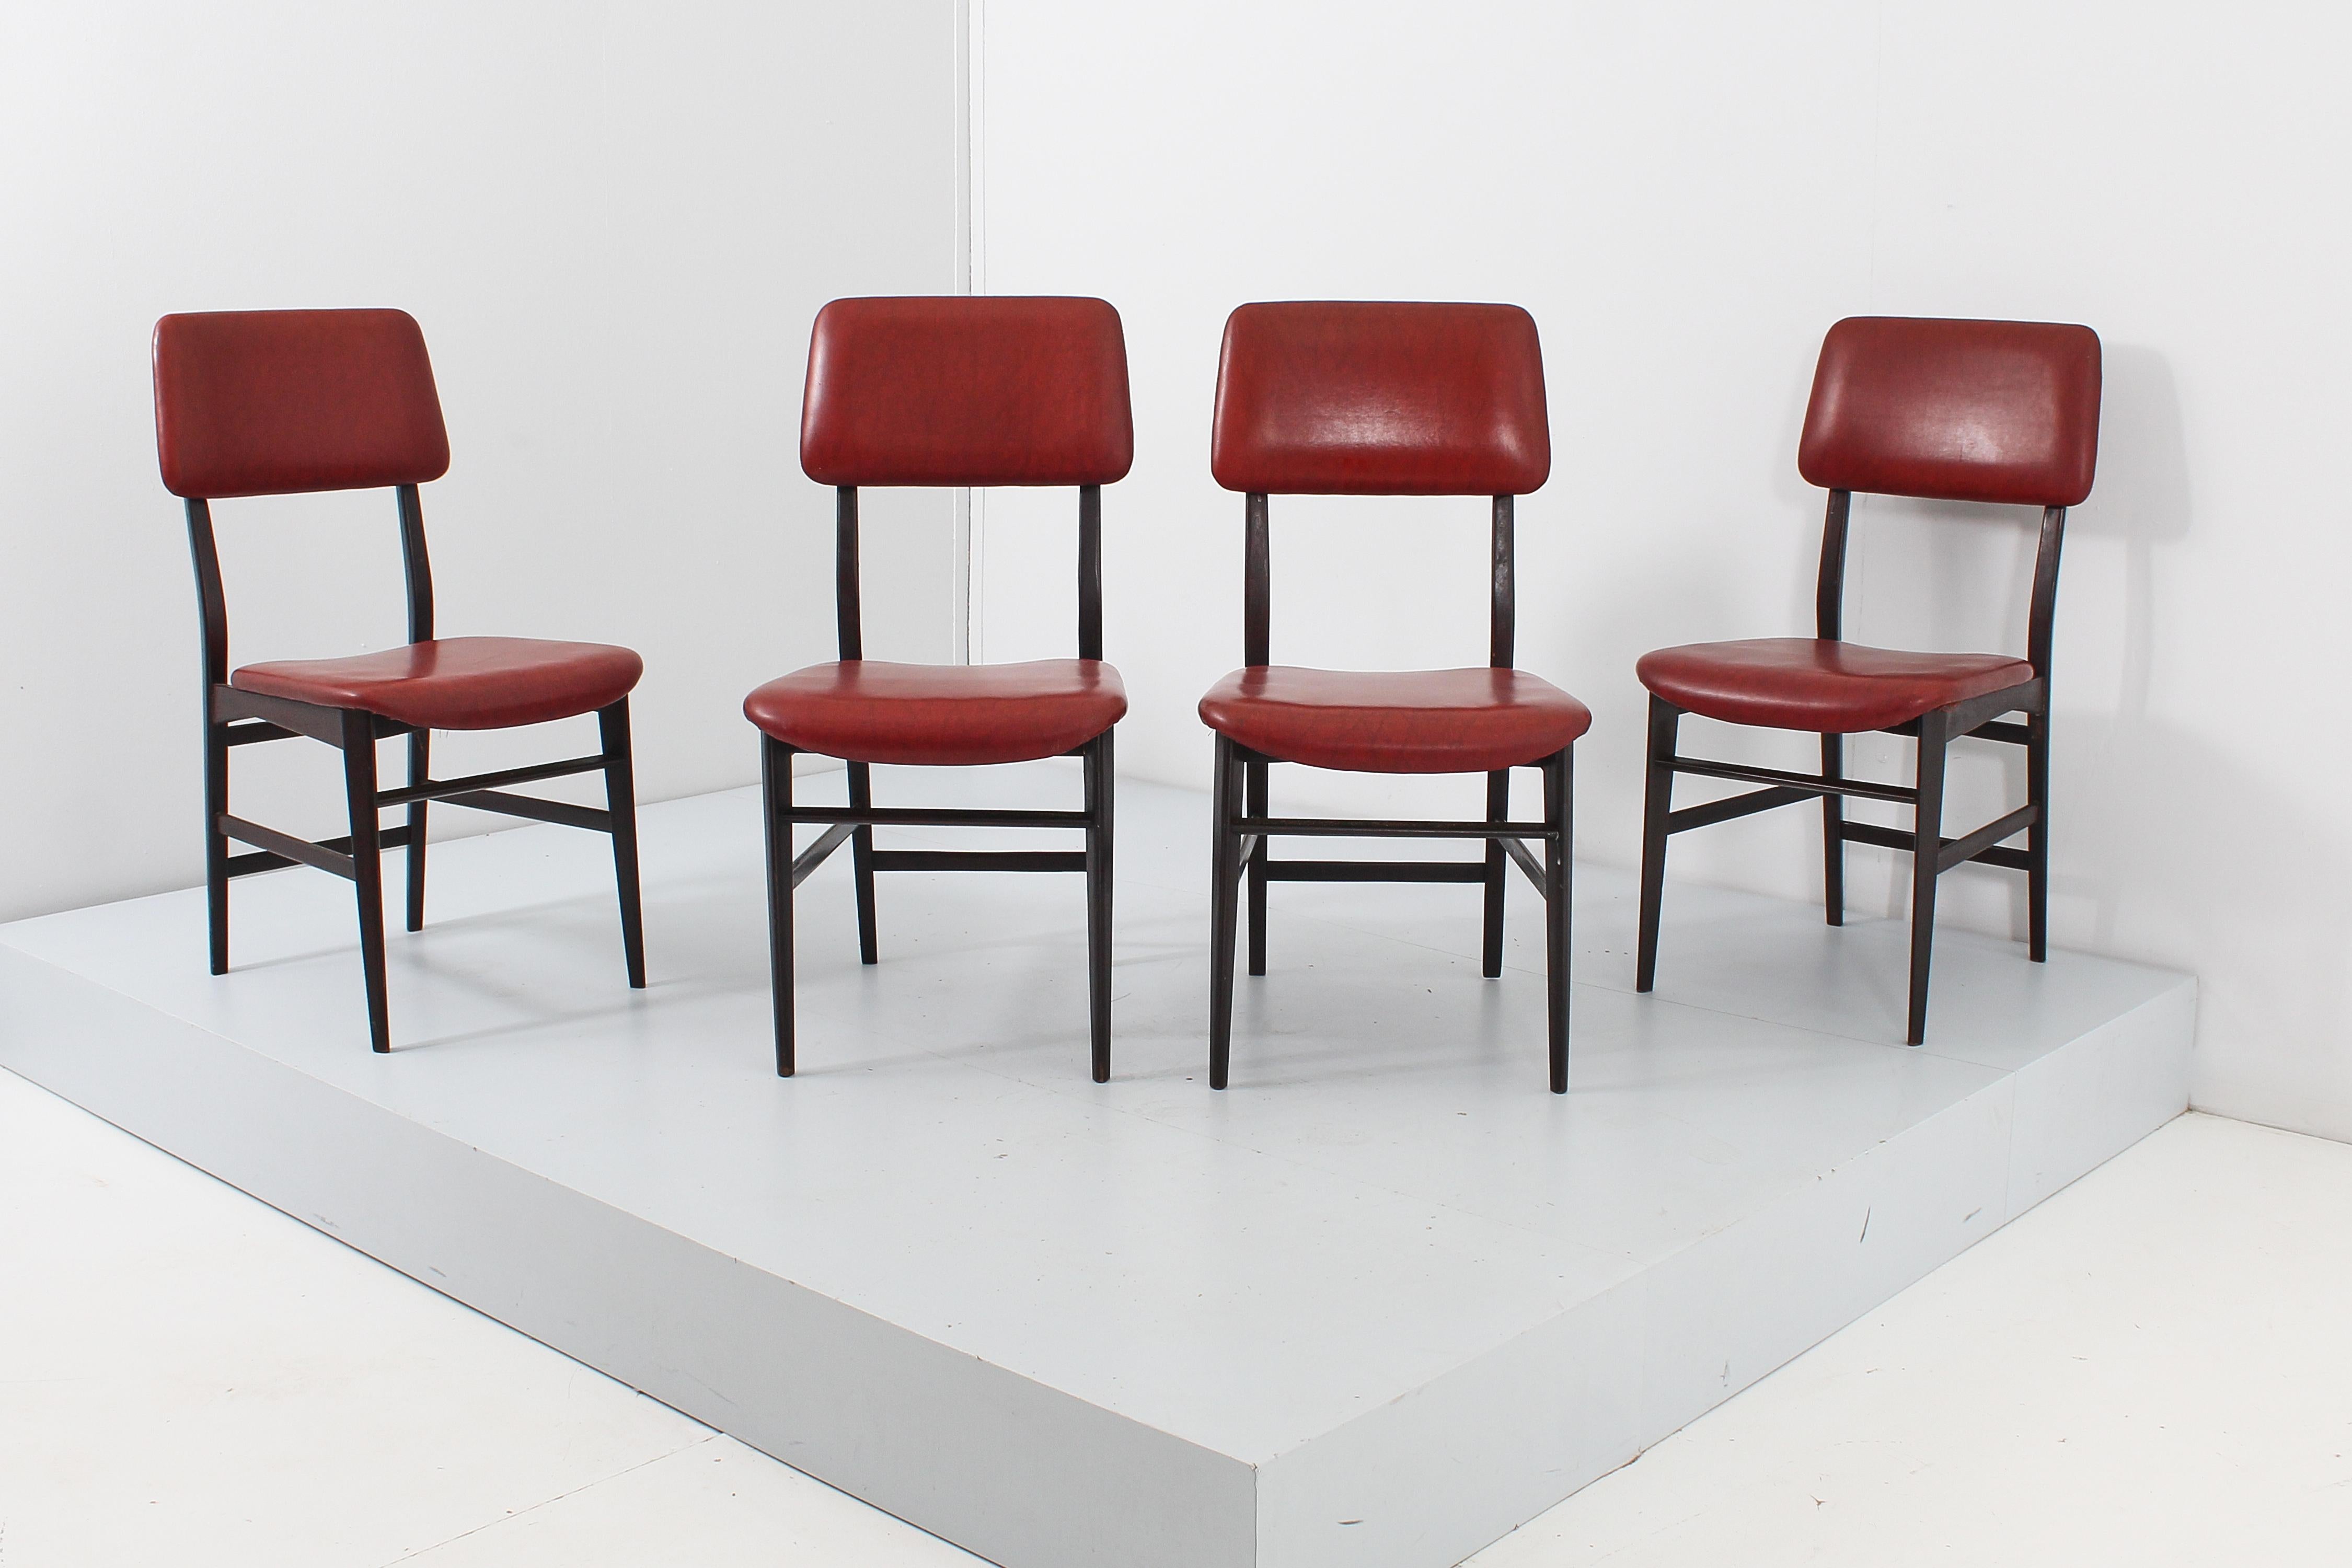 Faux Leather Mid-Century V. Dassi, E. Palutari Set of 4 Wooden Chairs, Italy, 1960s For Sale